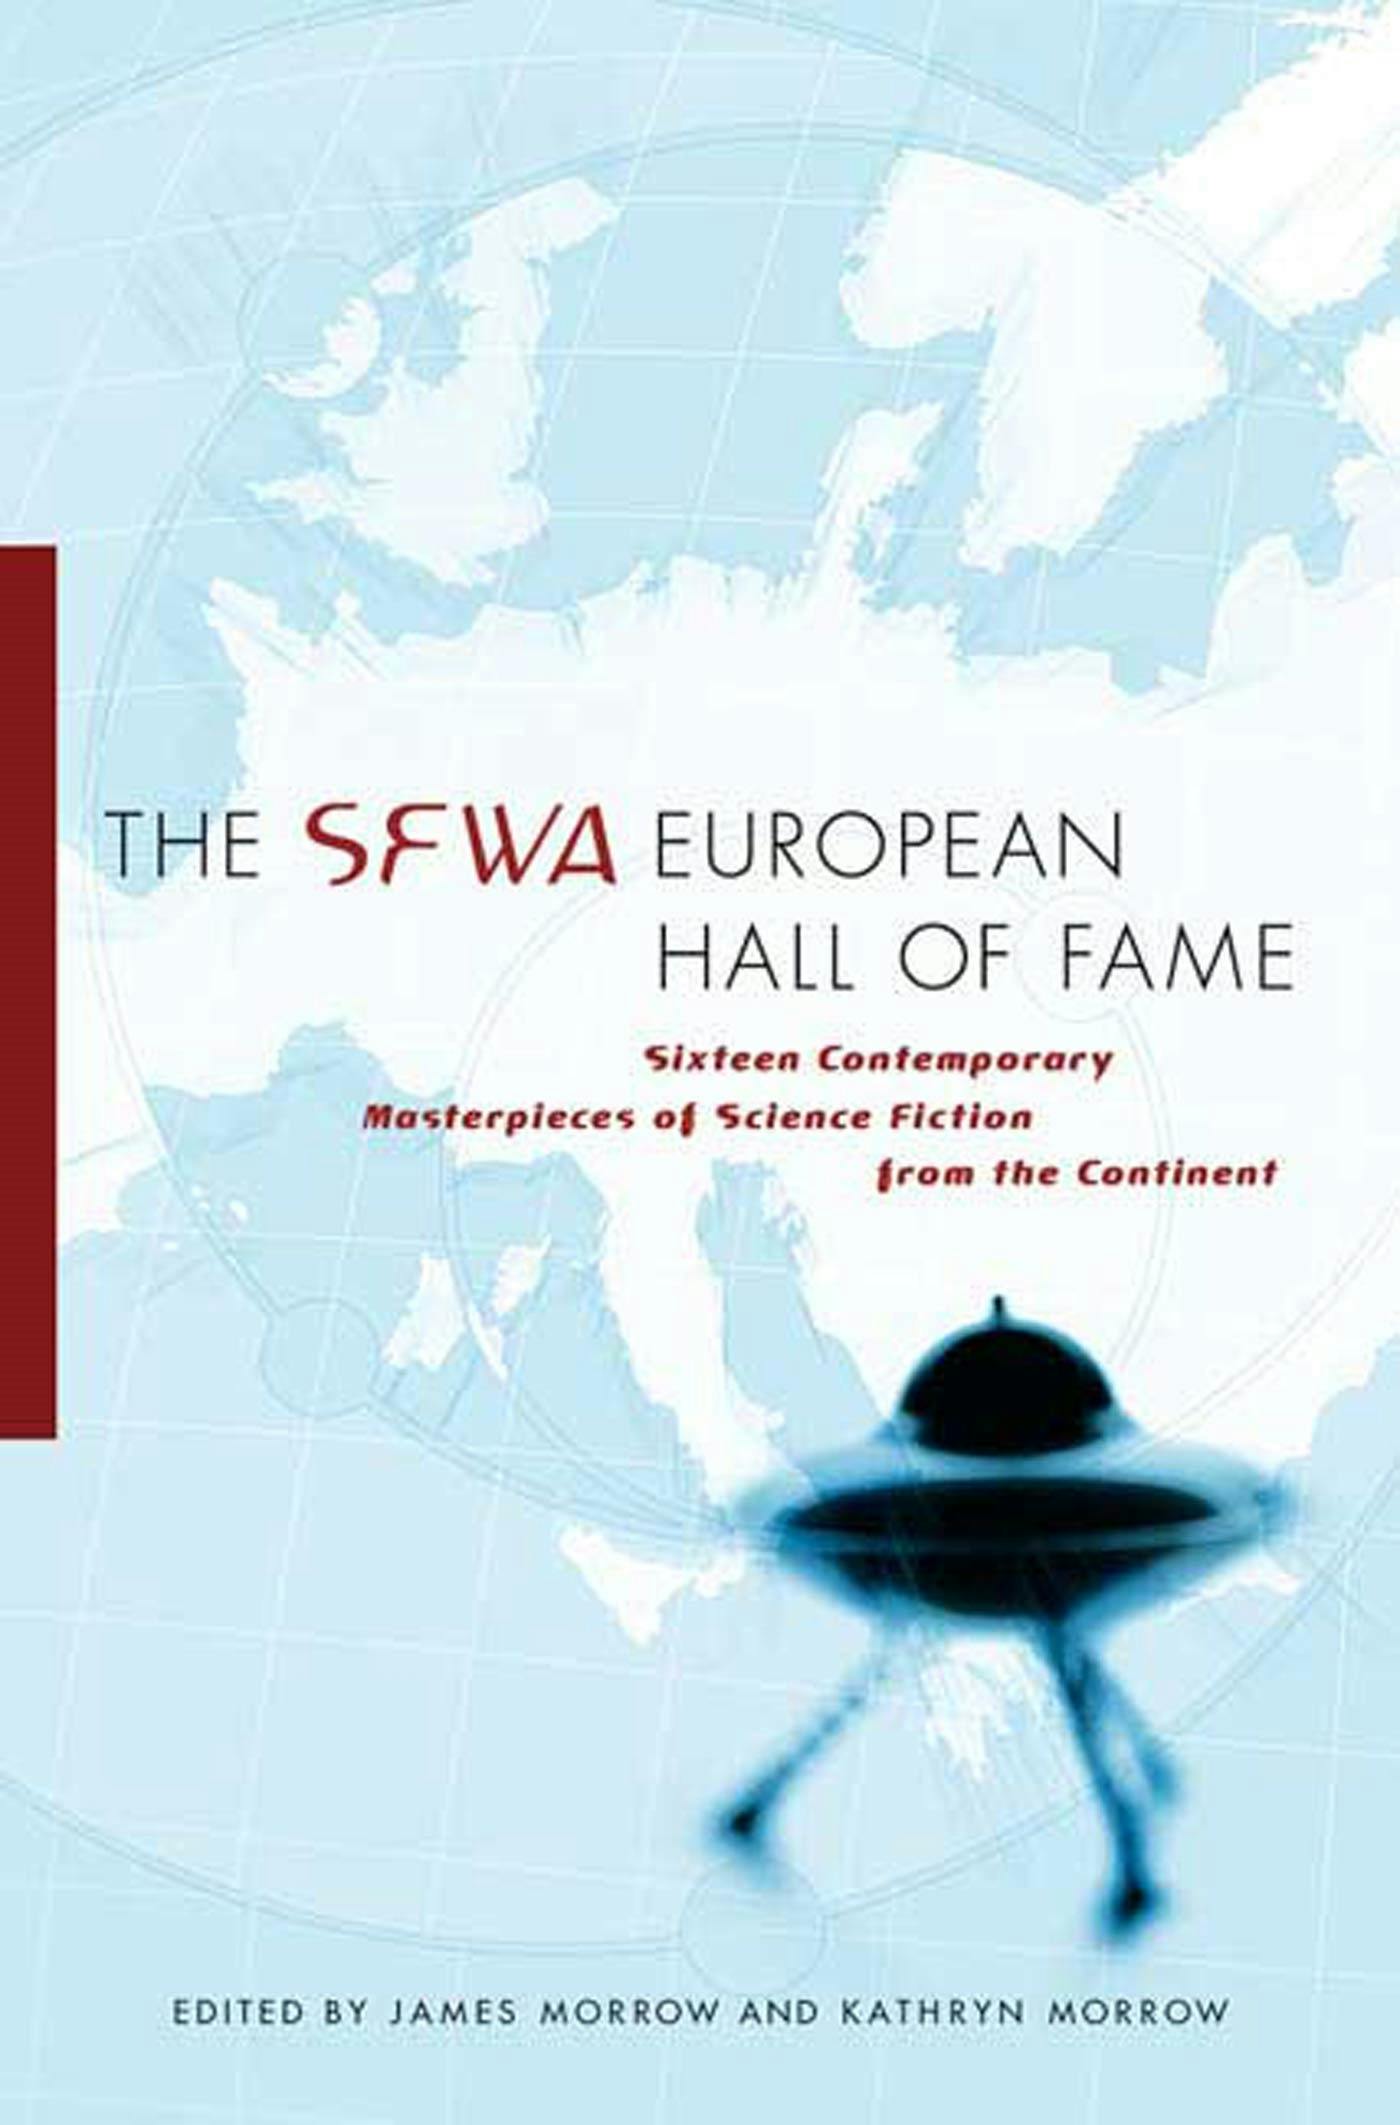 Cover for the book titled as: The SFWA European Hall of Fame